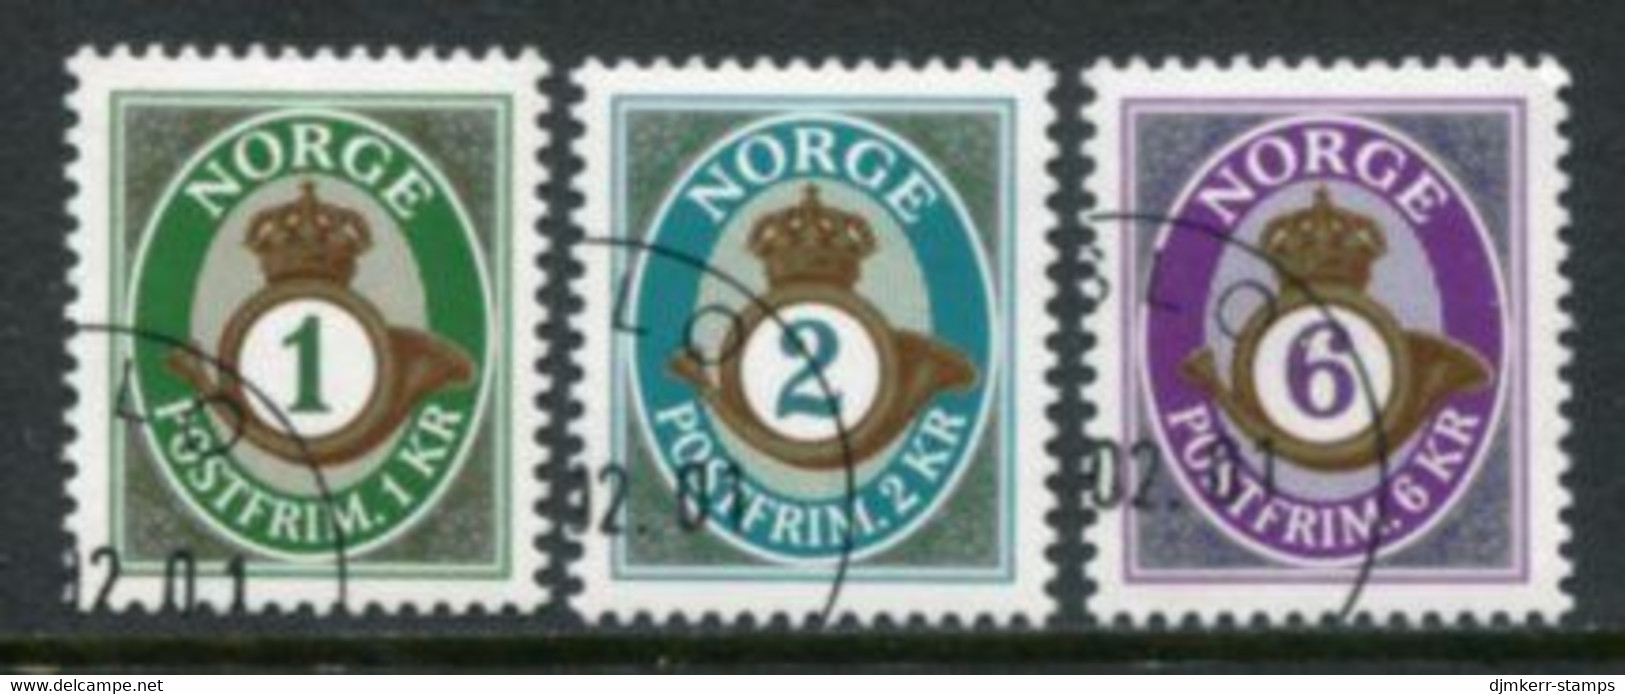 NORWAY 2001 Posthorn Definitive Used.  Michel 1380-82 - Usados